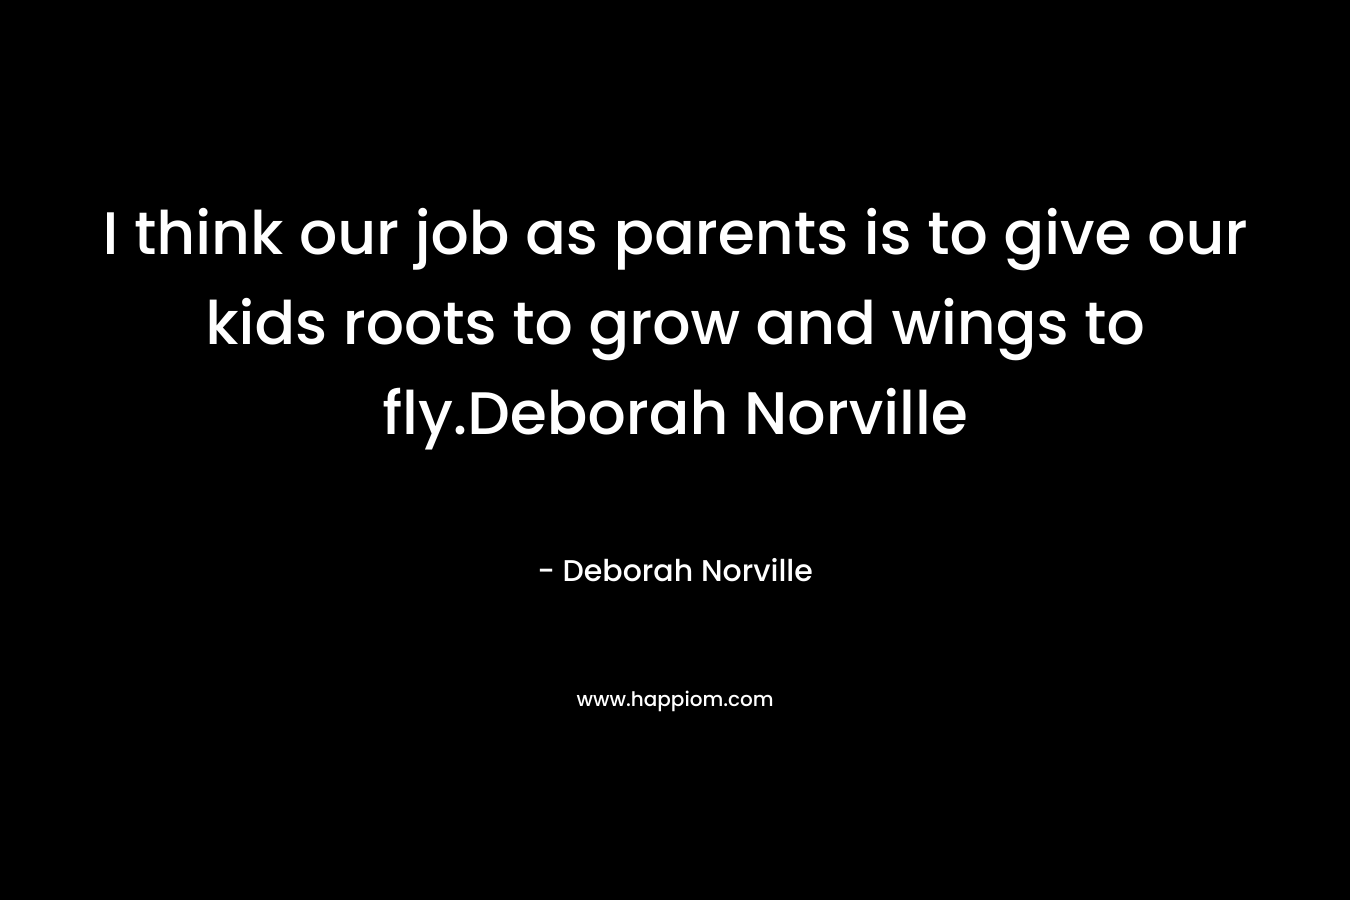 I think our job as parents is to give our kids roots to grow and wings to fly.Deborah Norville